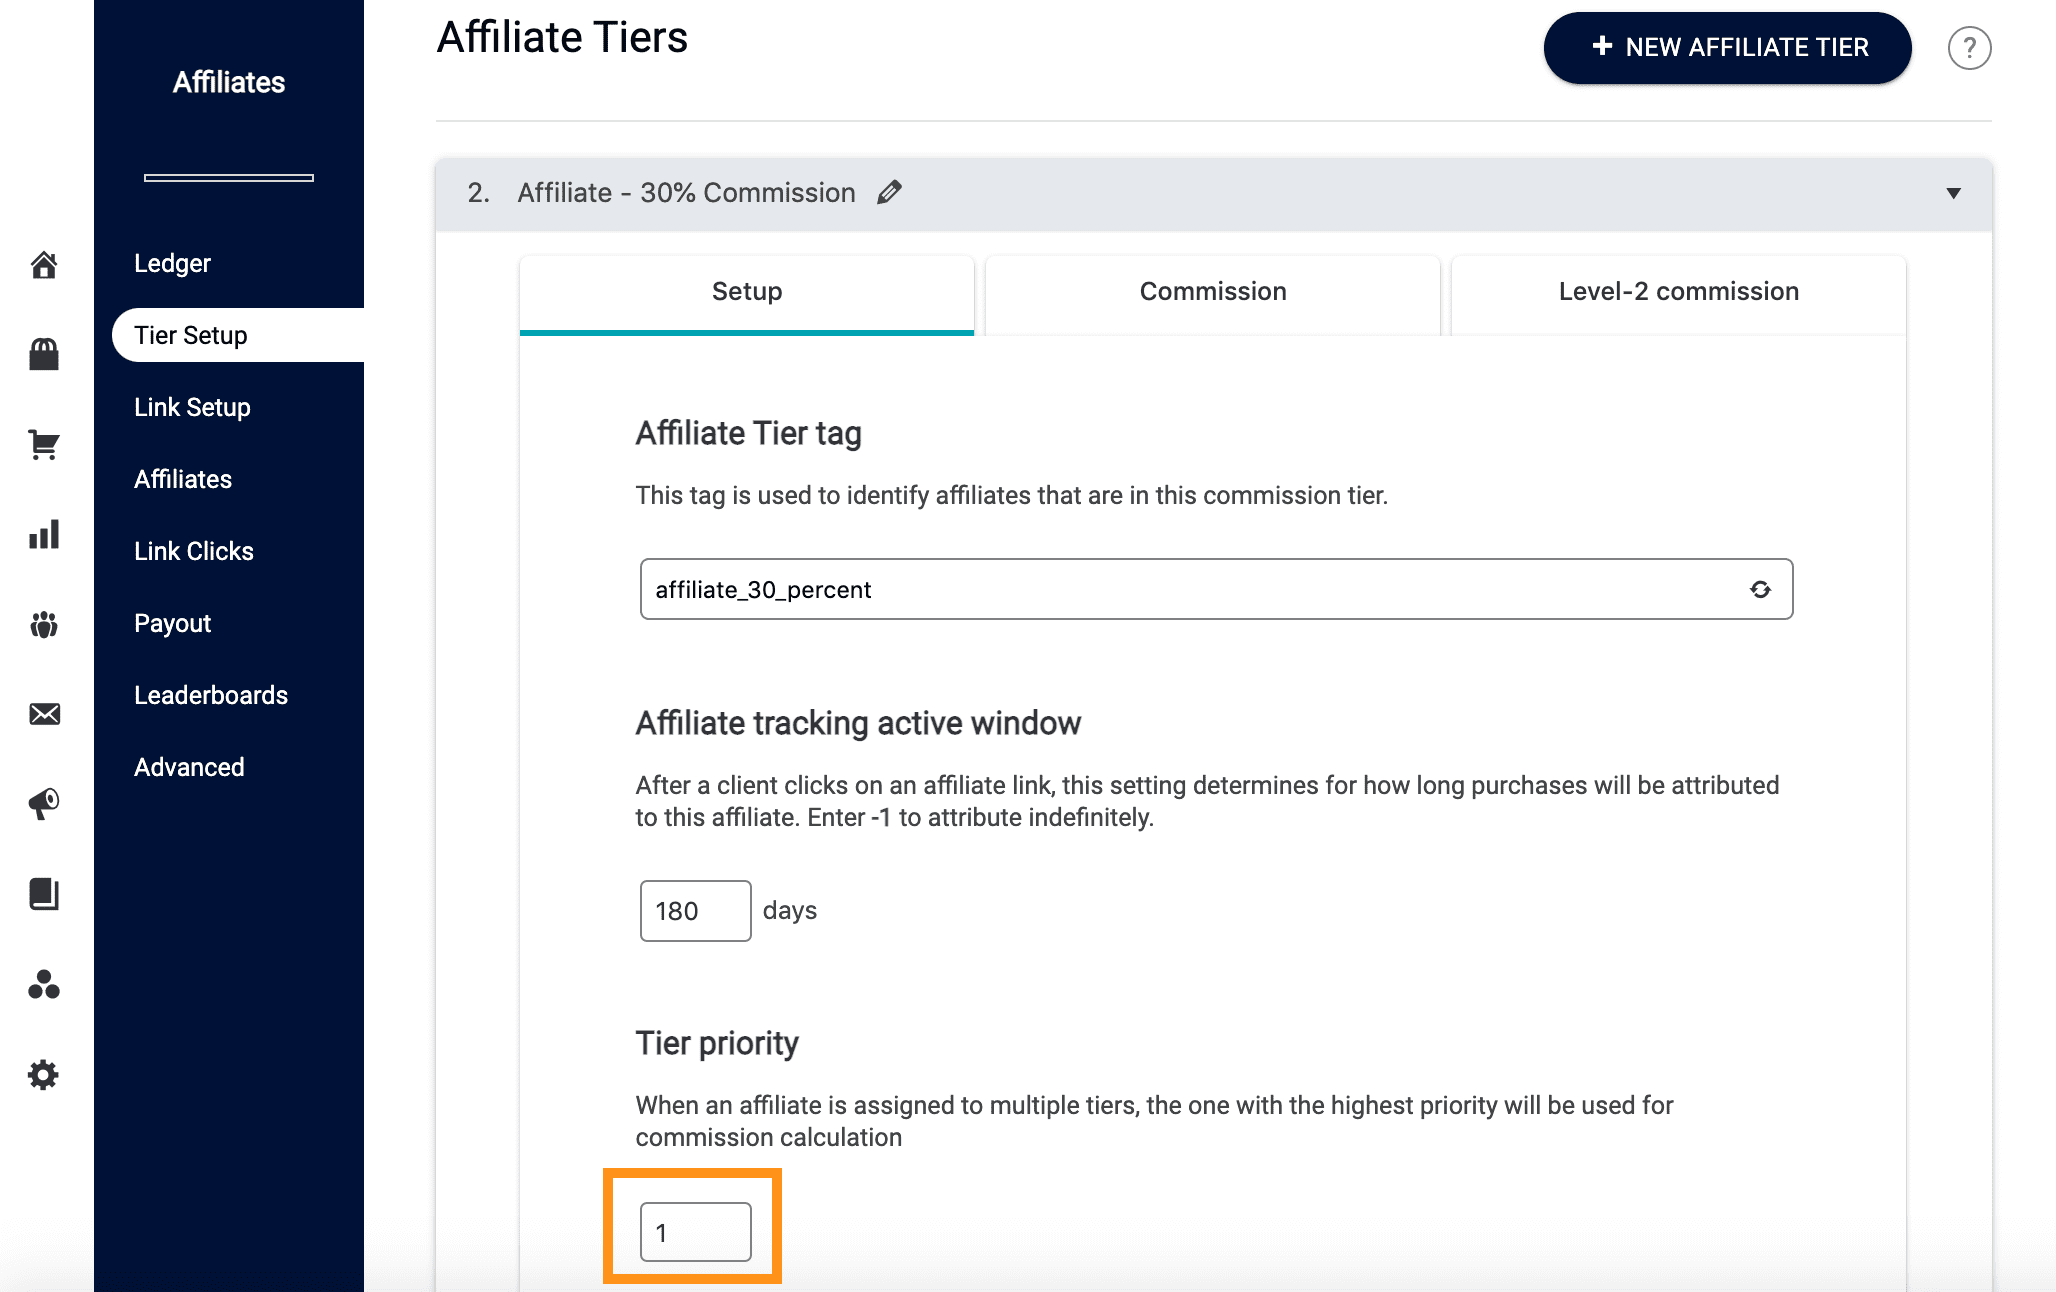 AccessAlly affiliate tier priority settings